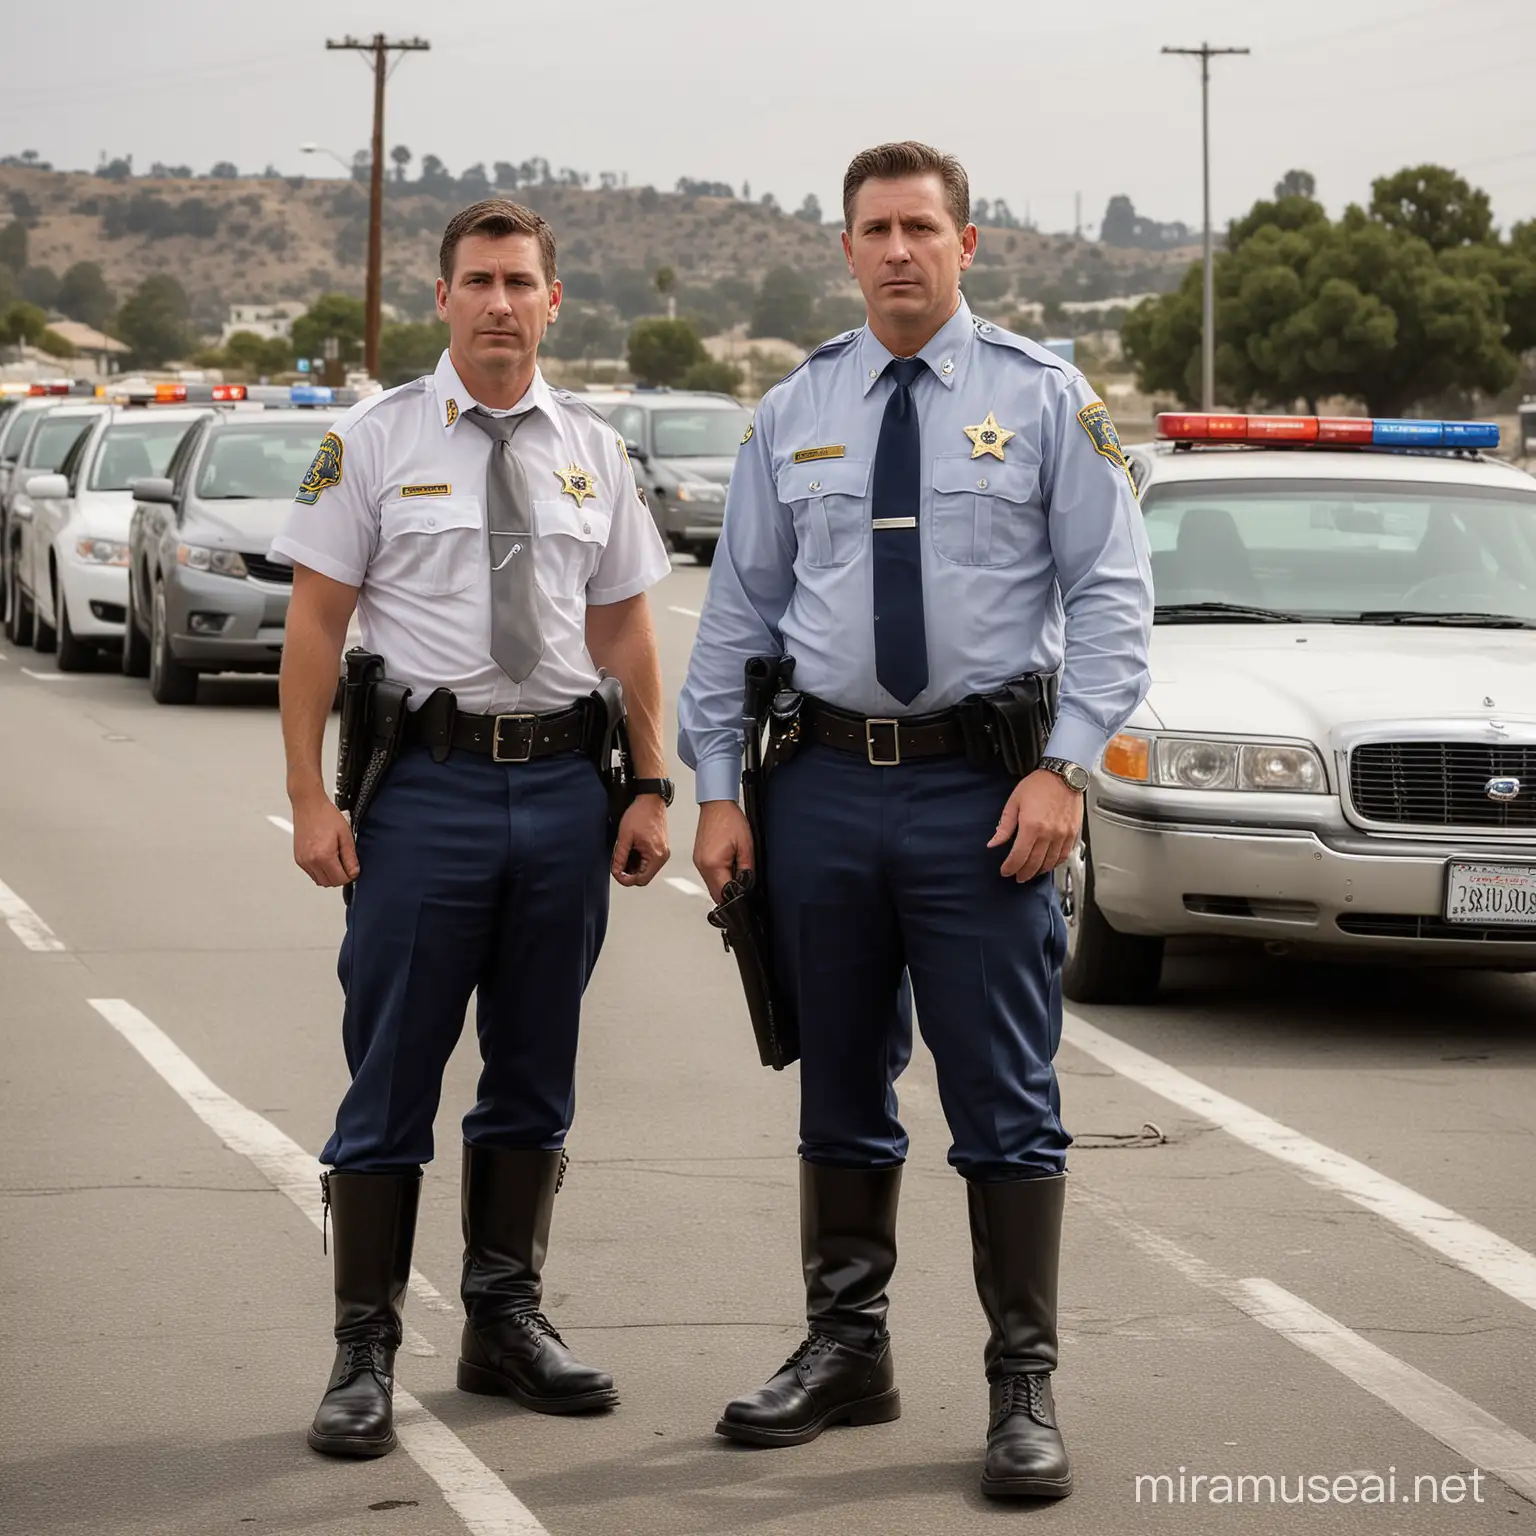 California Highway Patrol Officers Conducting Arrest on Busy Highway